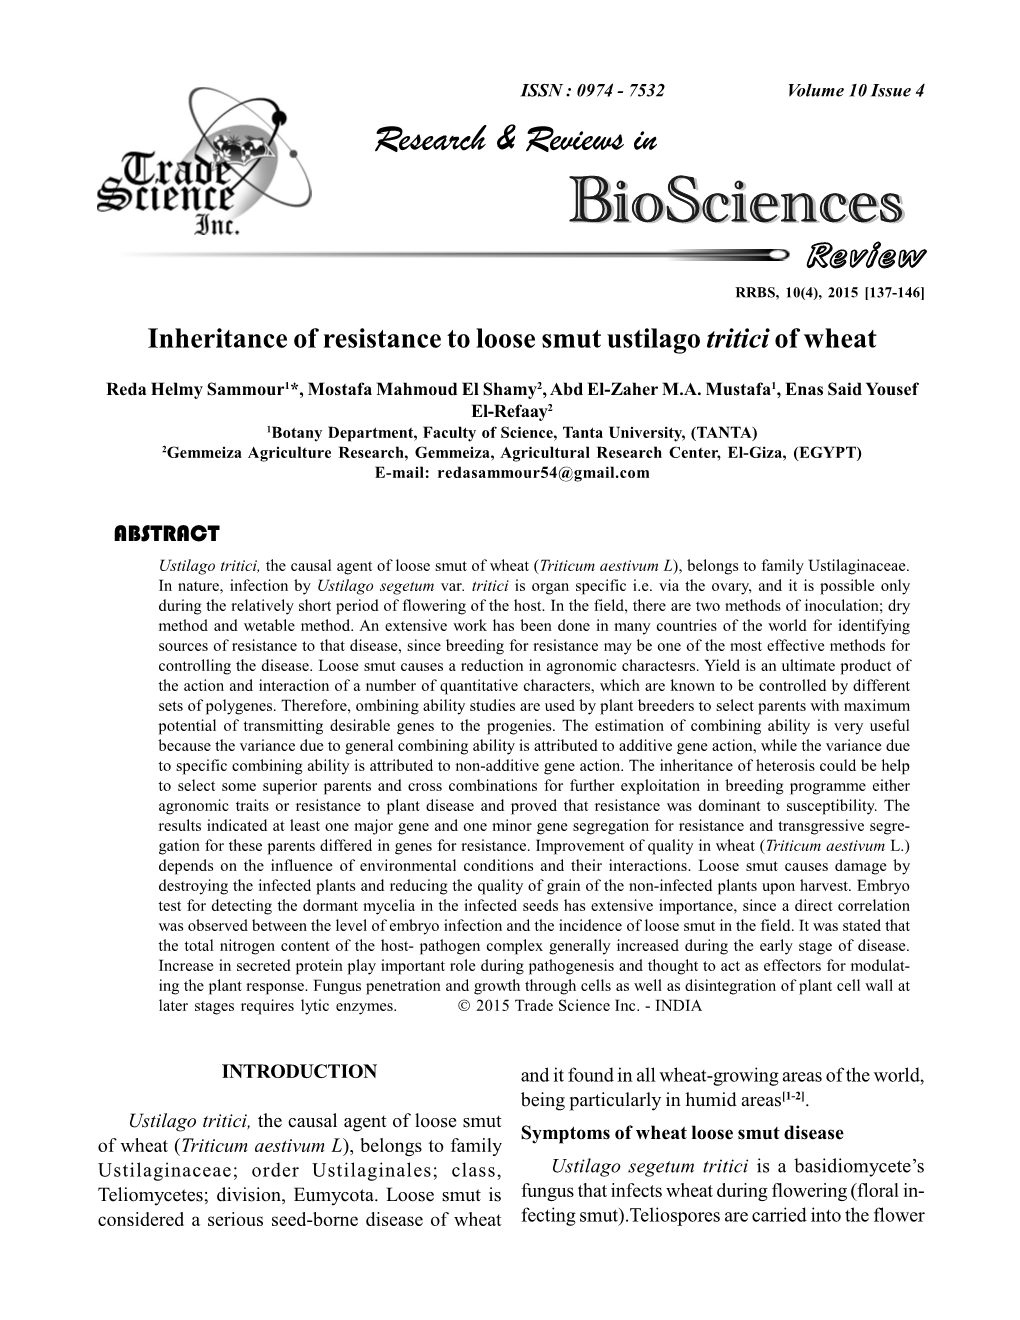 Inheritance of Resistance to Loose Smut Ustilago Tritici of Wheat